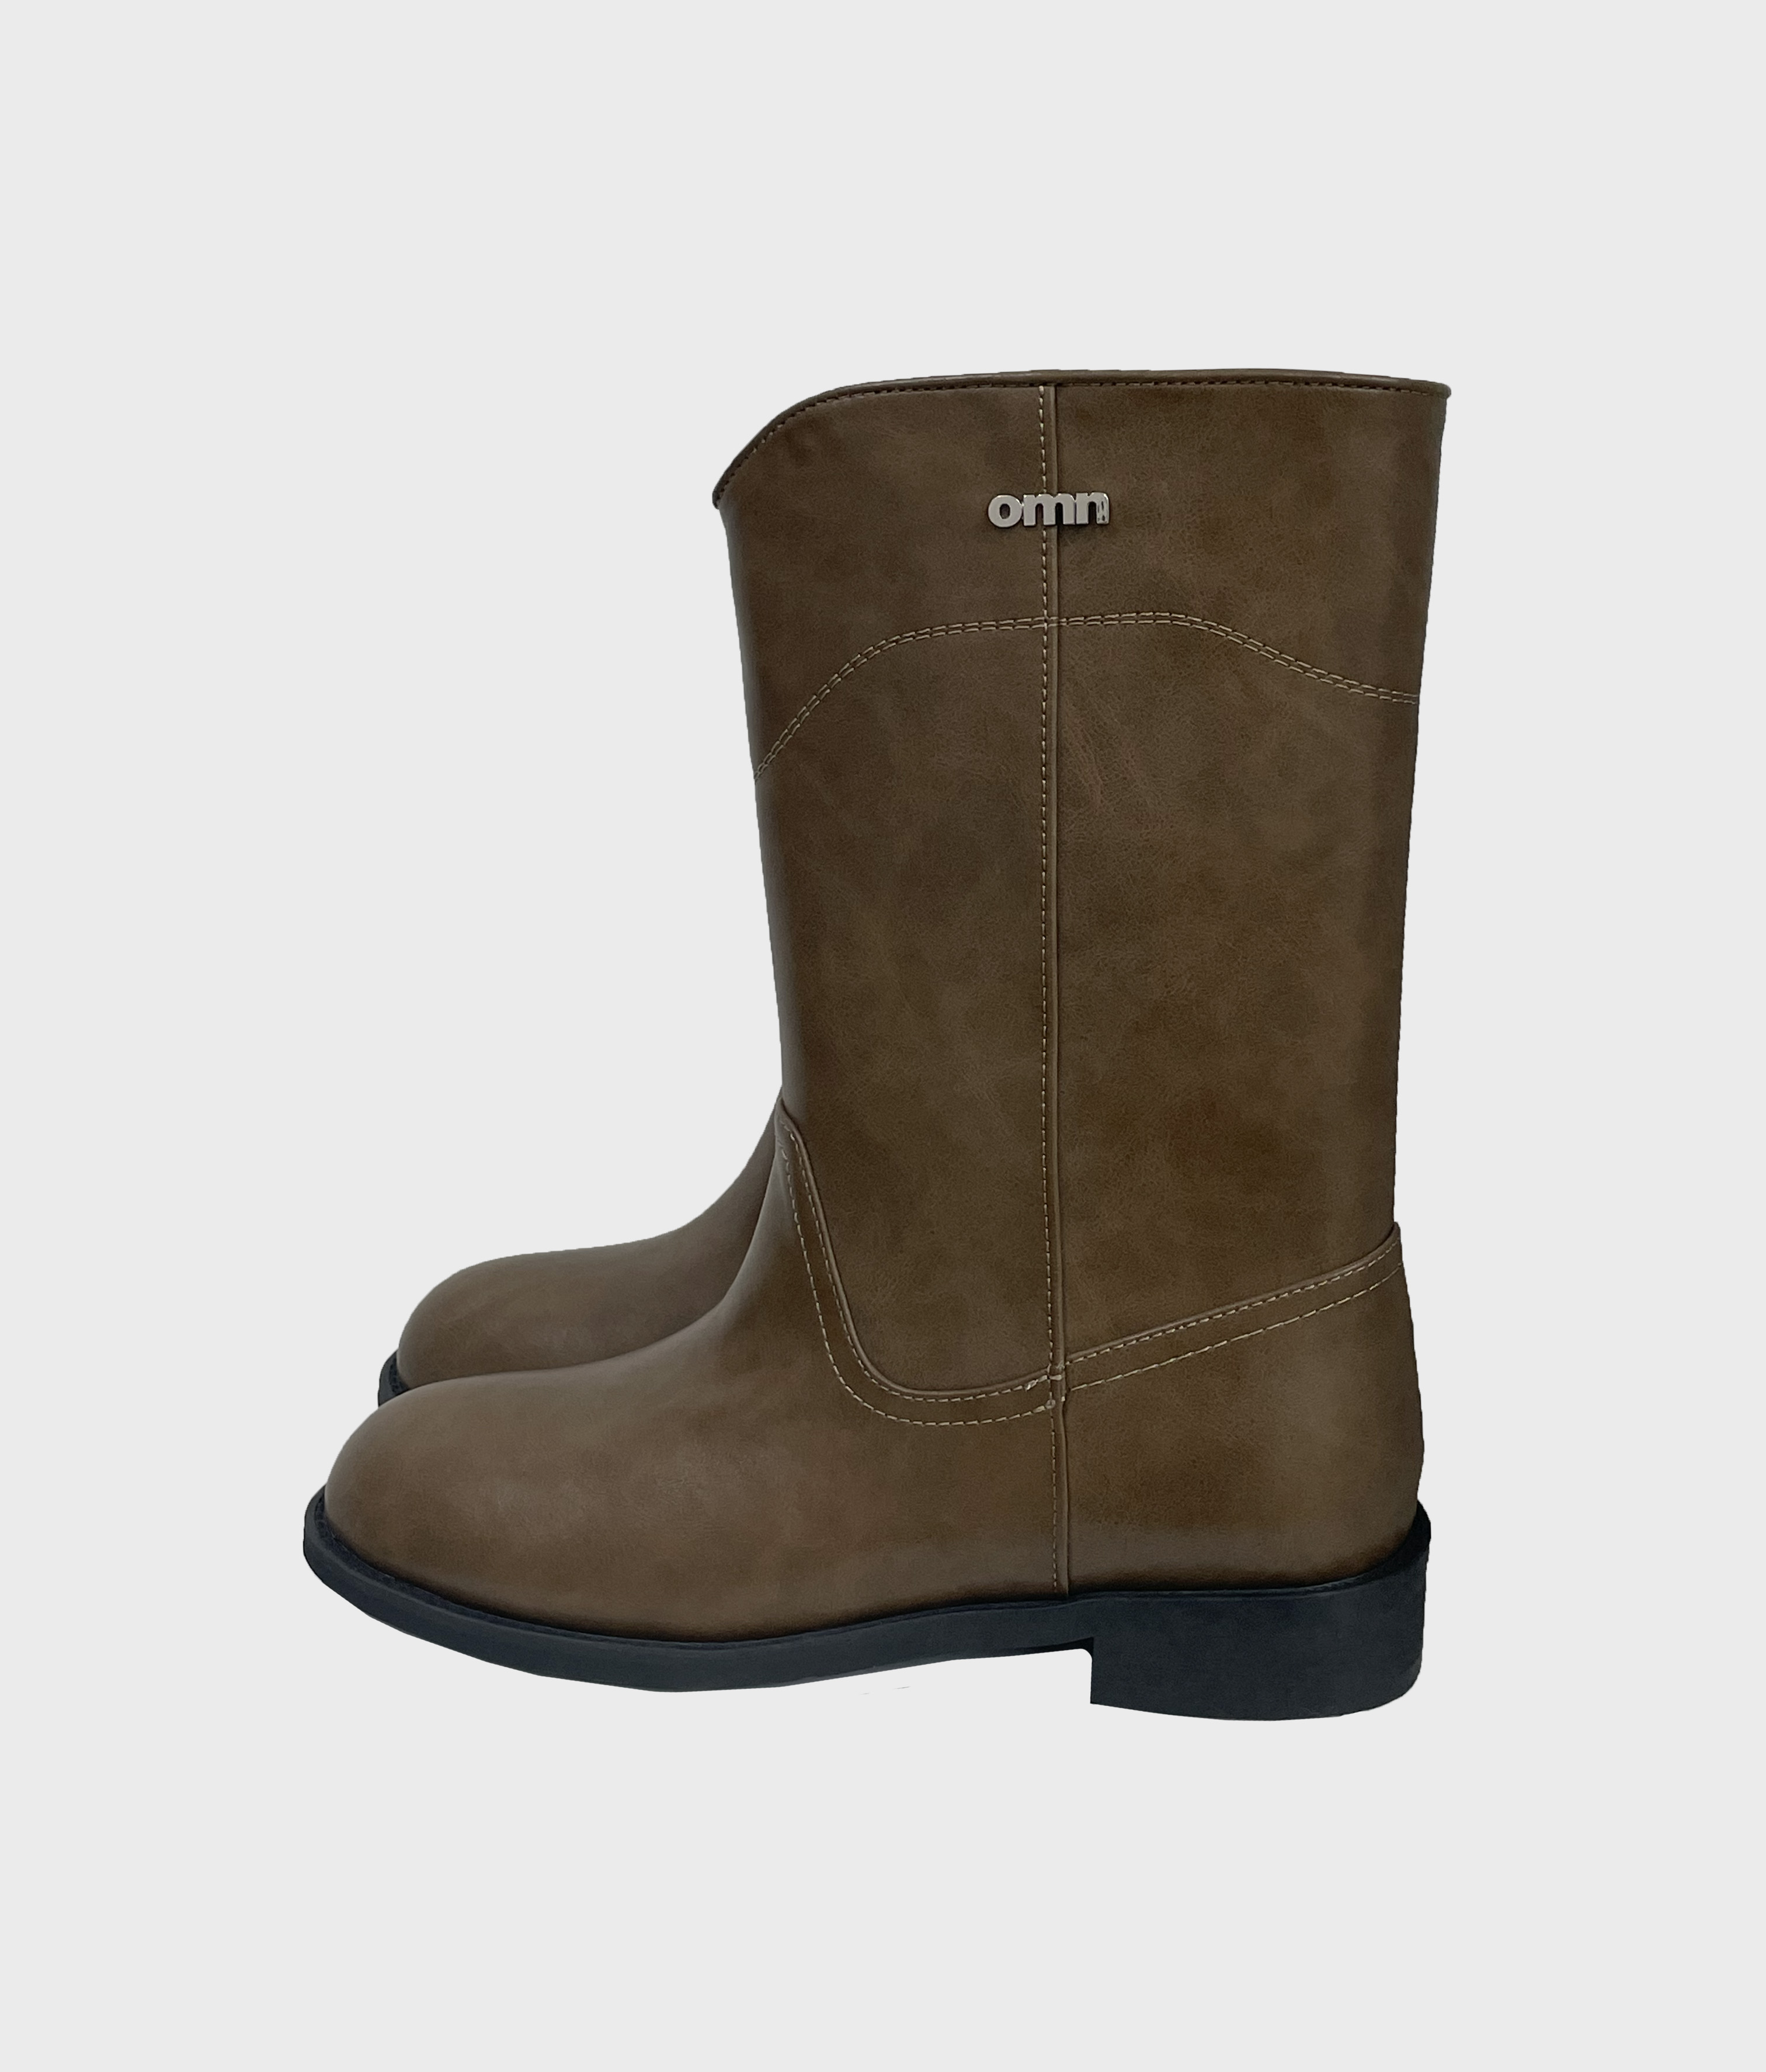 omn boots [brown] 03.20 예약발송 15%